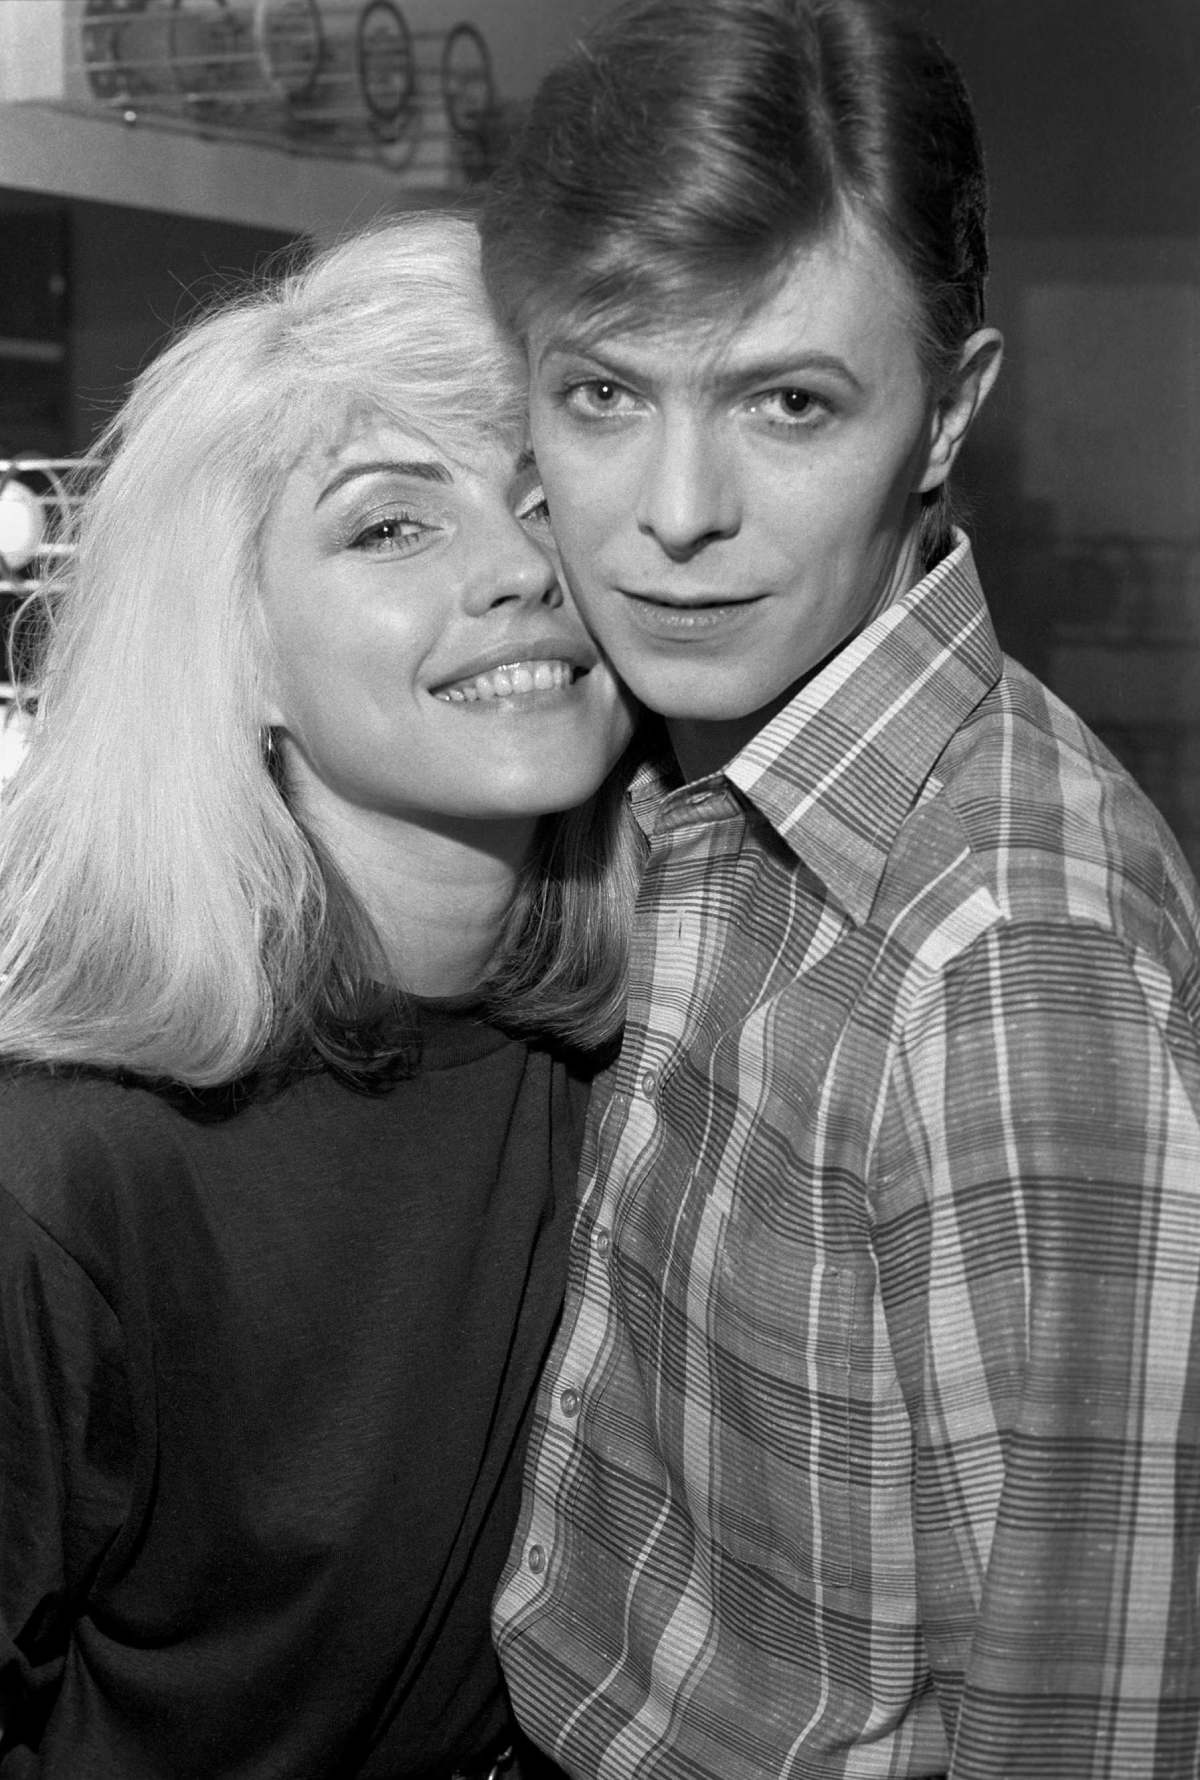 With David Bowie...